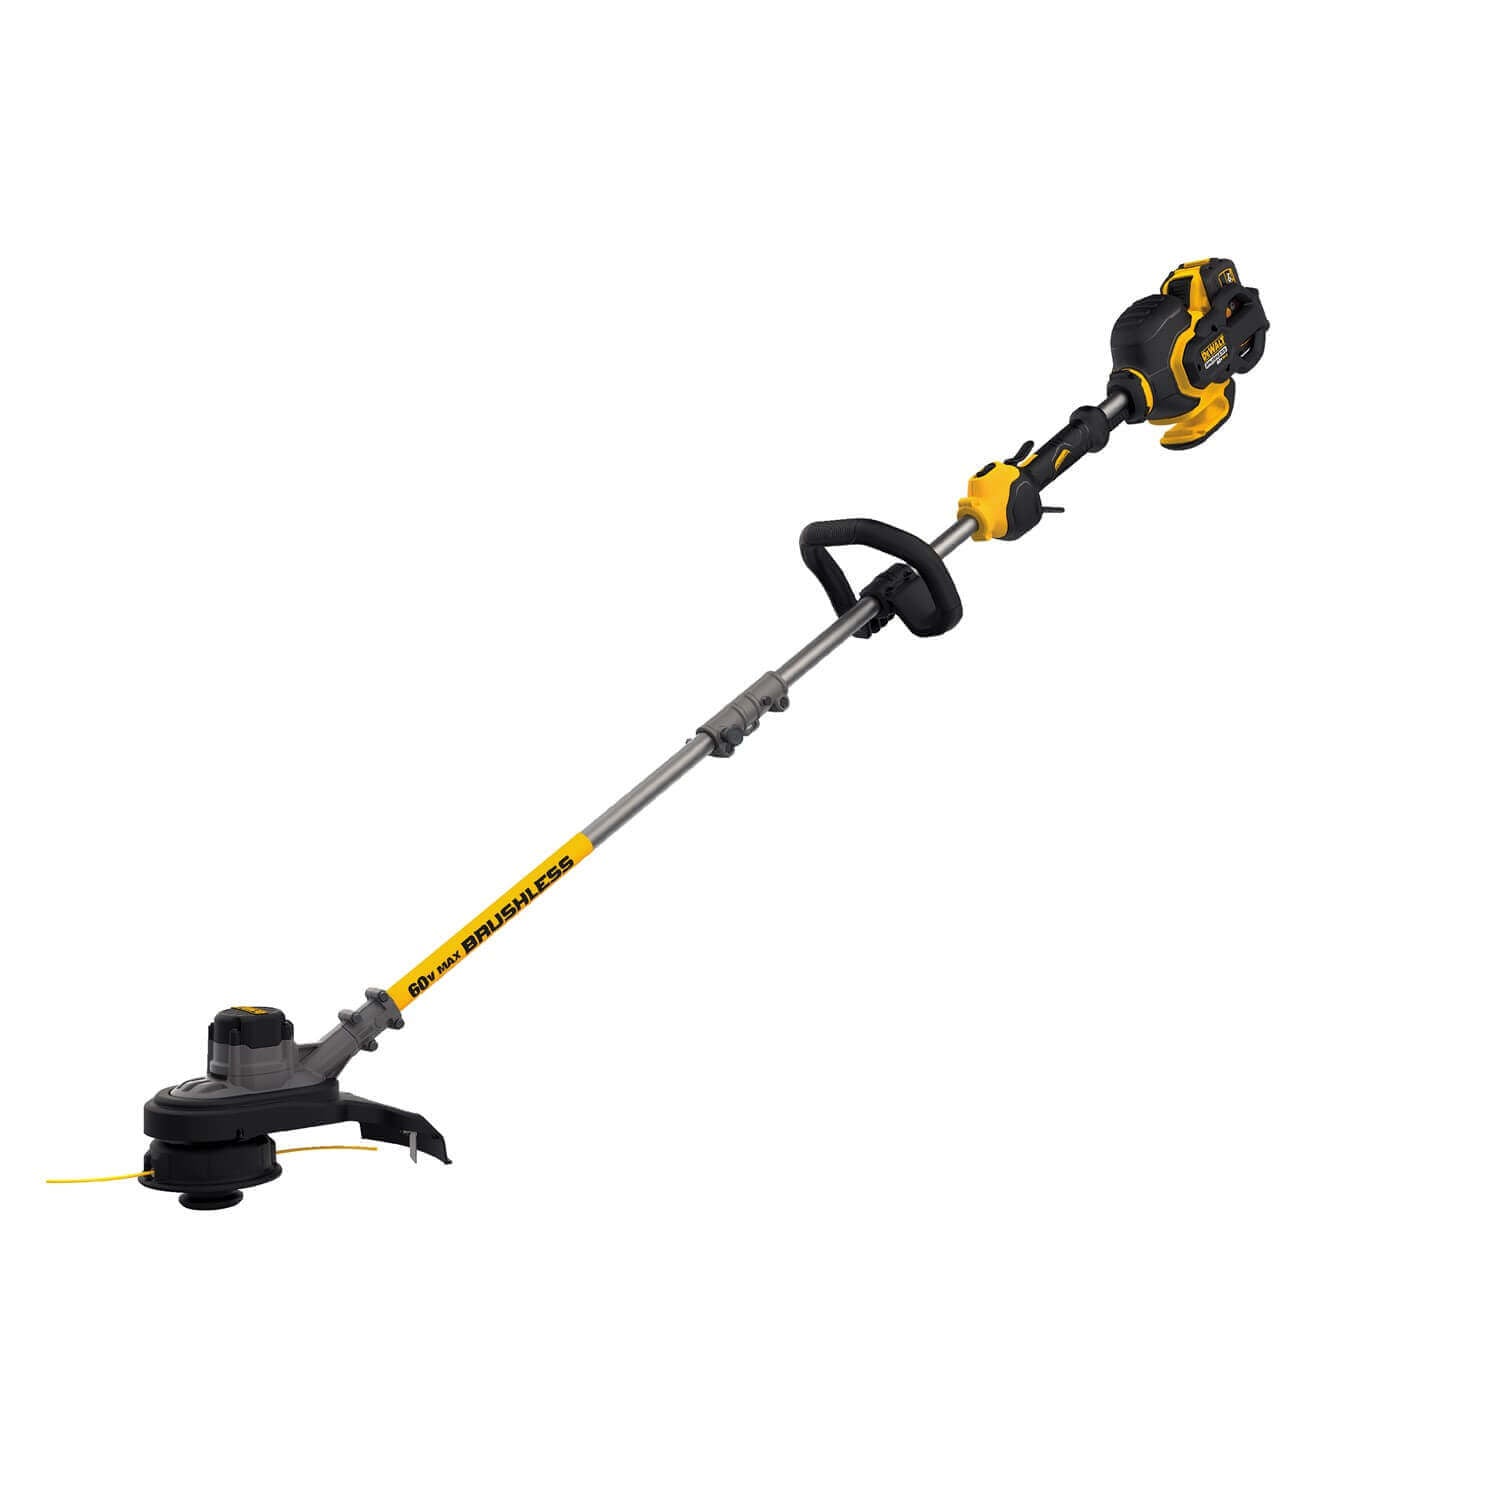 The Dewalt DCST970X1 String Trimmer Review - wise-line-tools